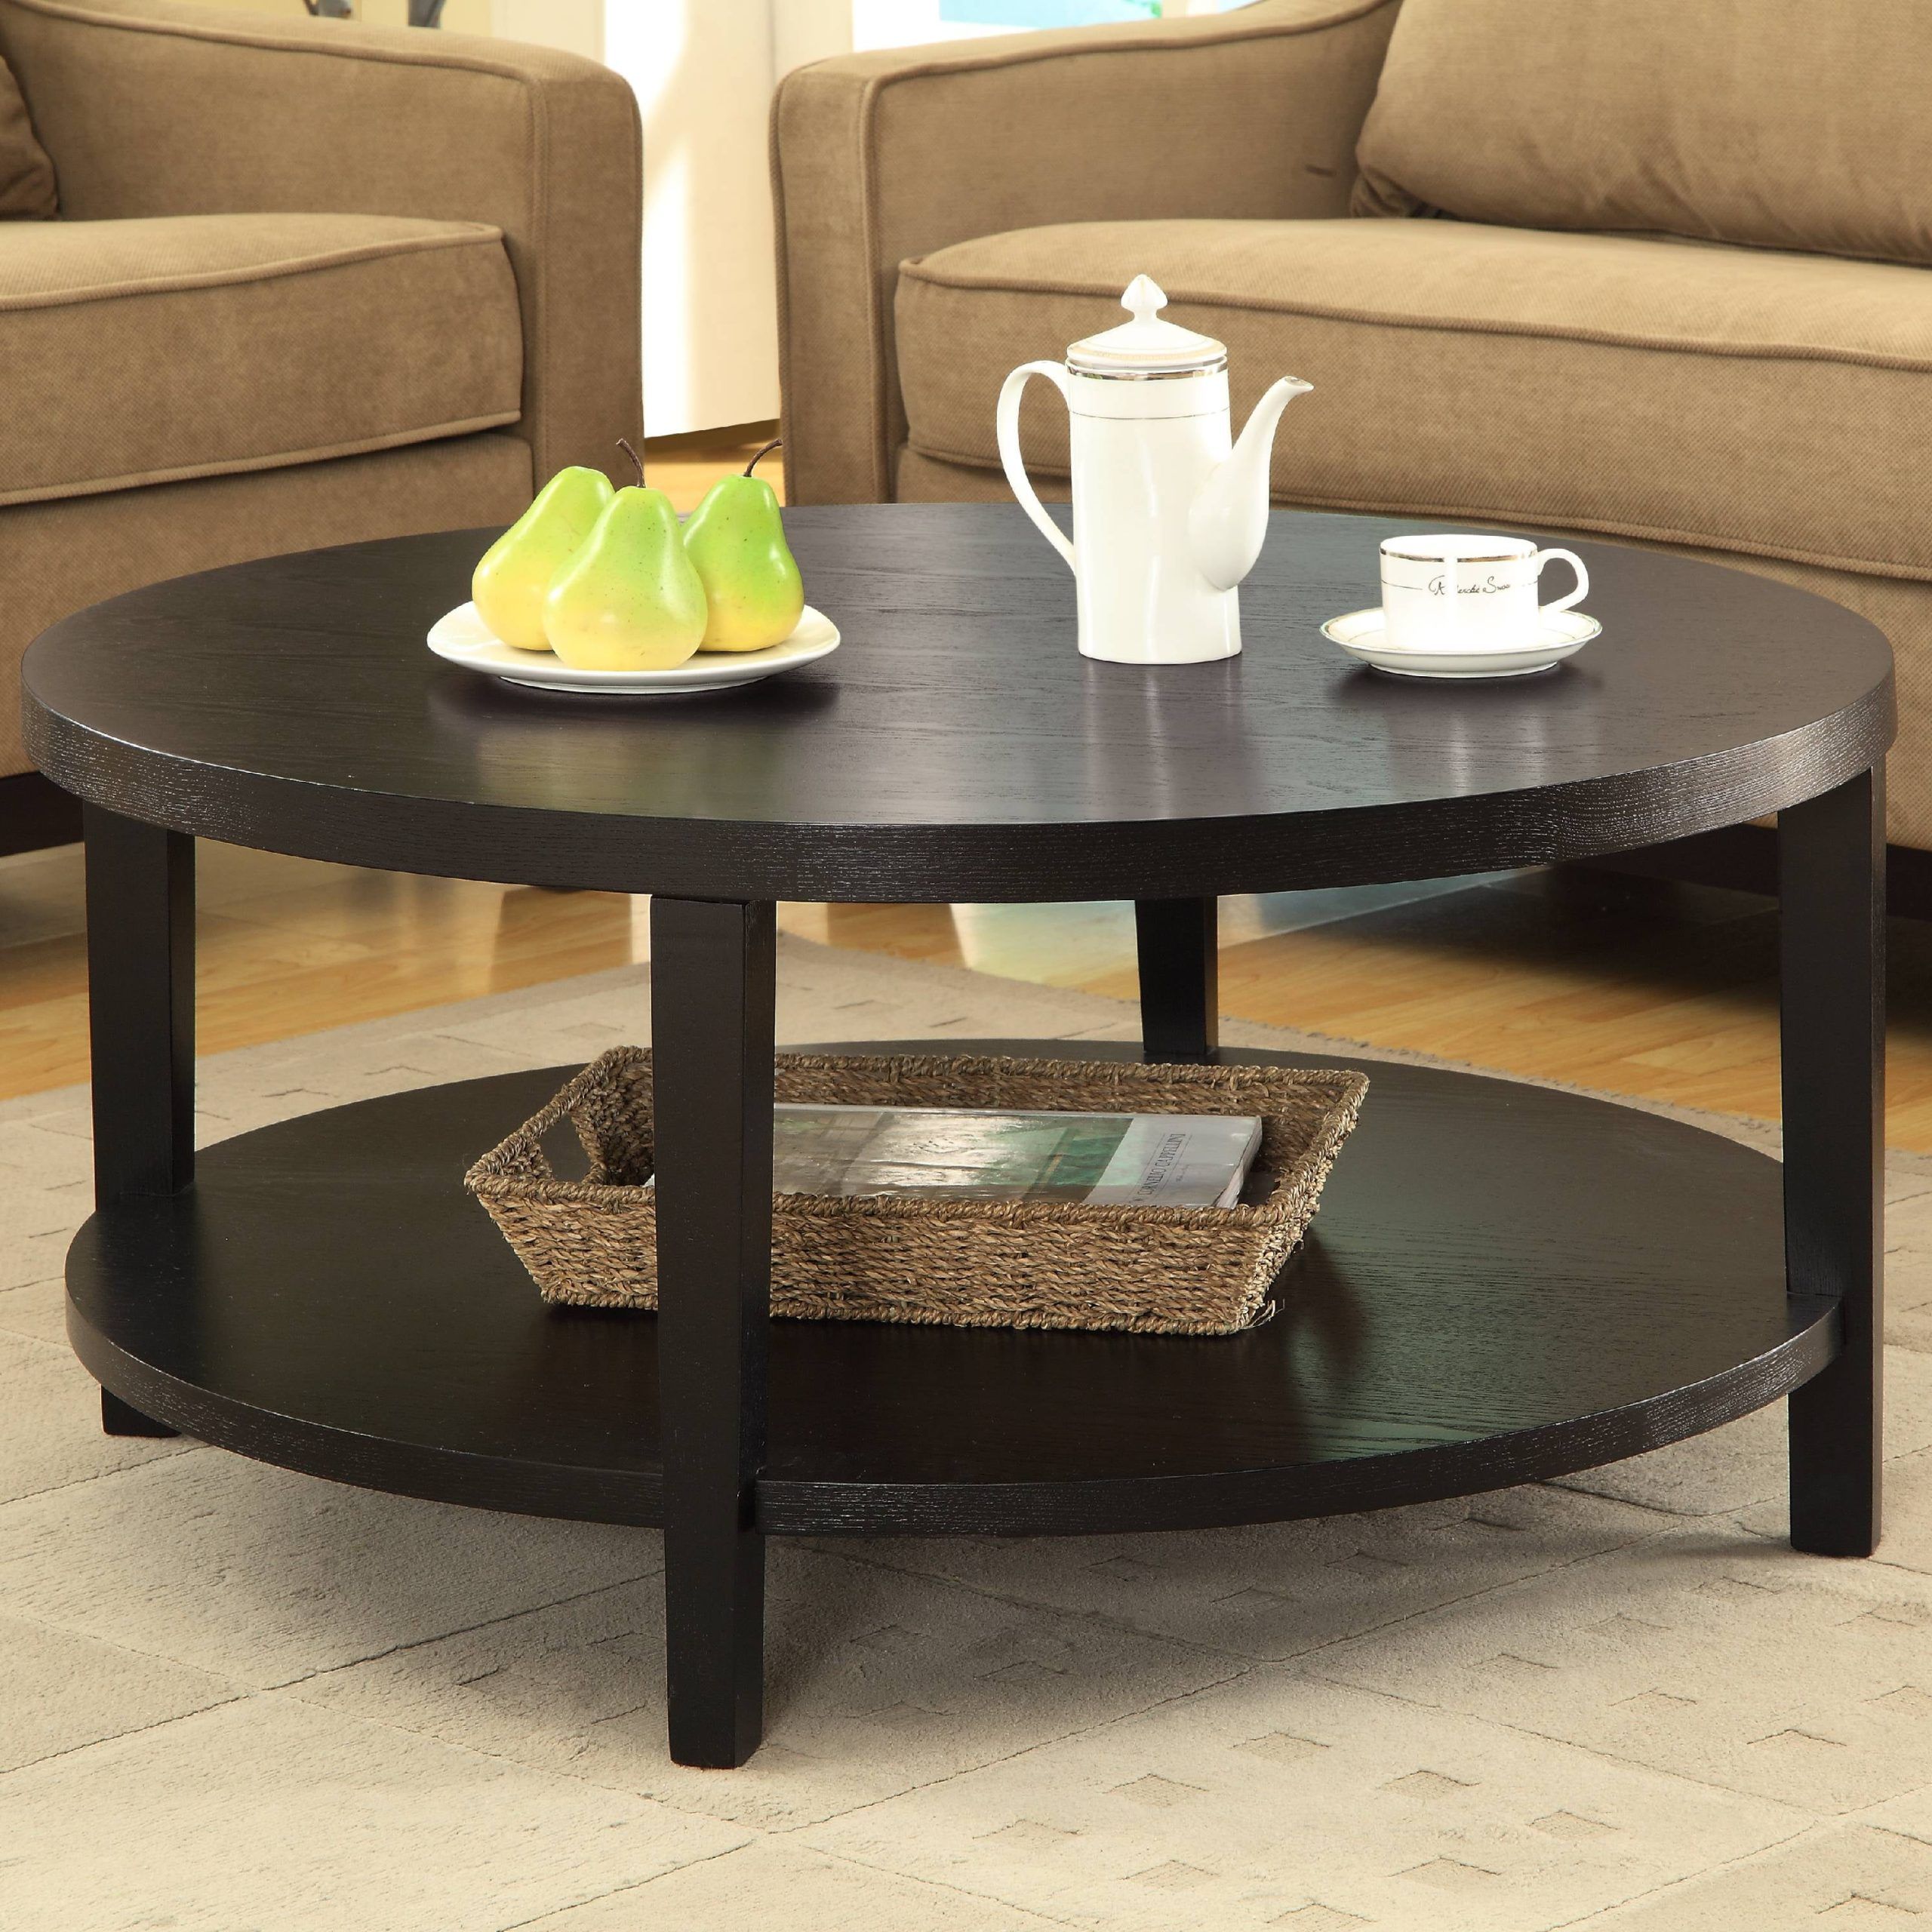 Espresso Round Coffee Table – Southern Enterprises Voyager Espresso With Regard To Round Coffee Tables (Gallery 16 of 20)